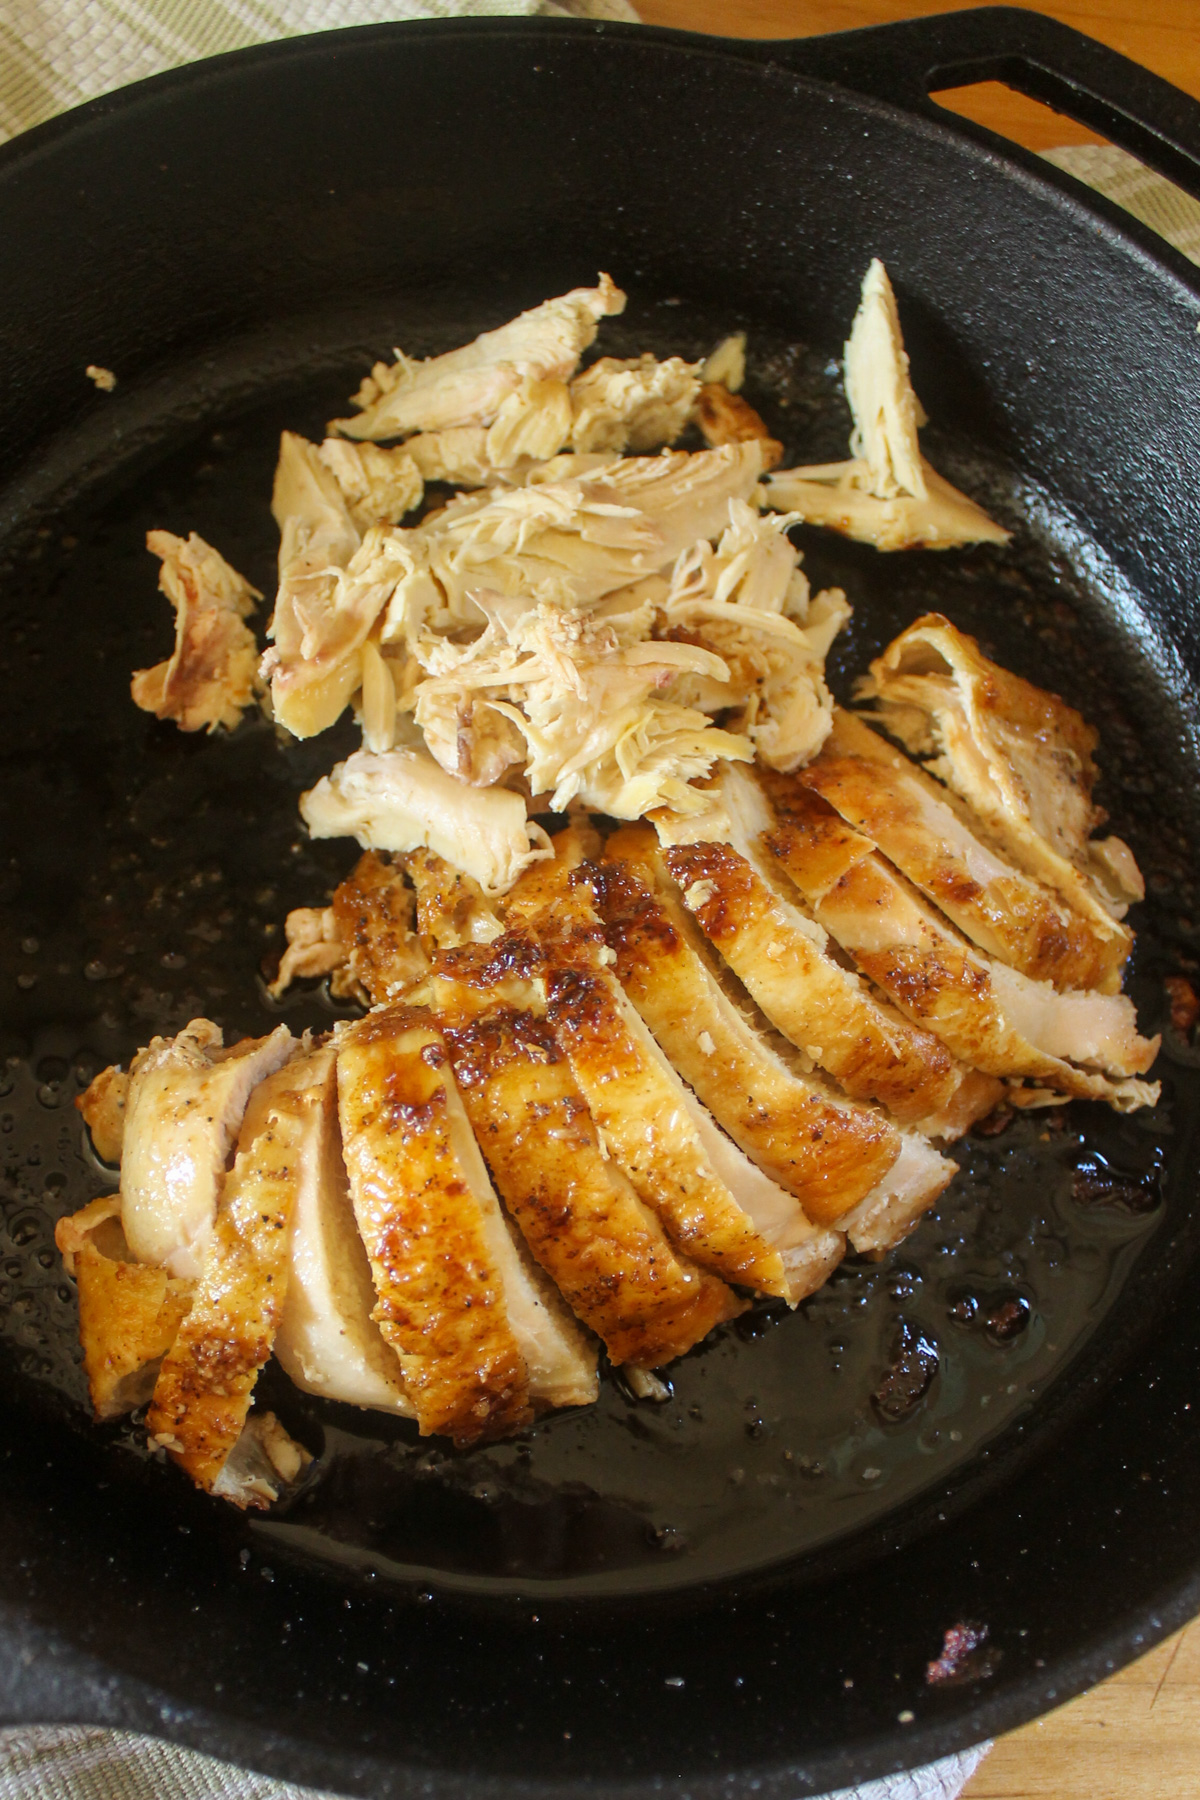 The sliced chicken breast meat in a cast iron skillet.